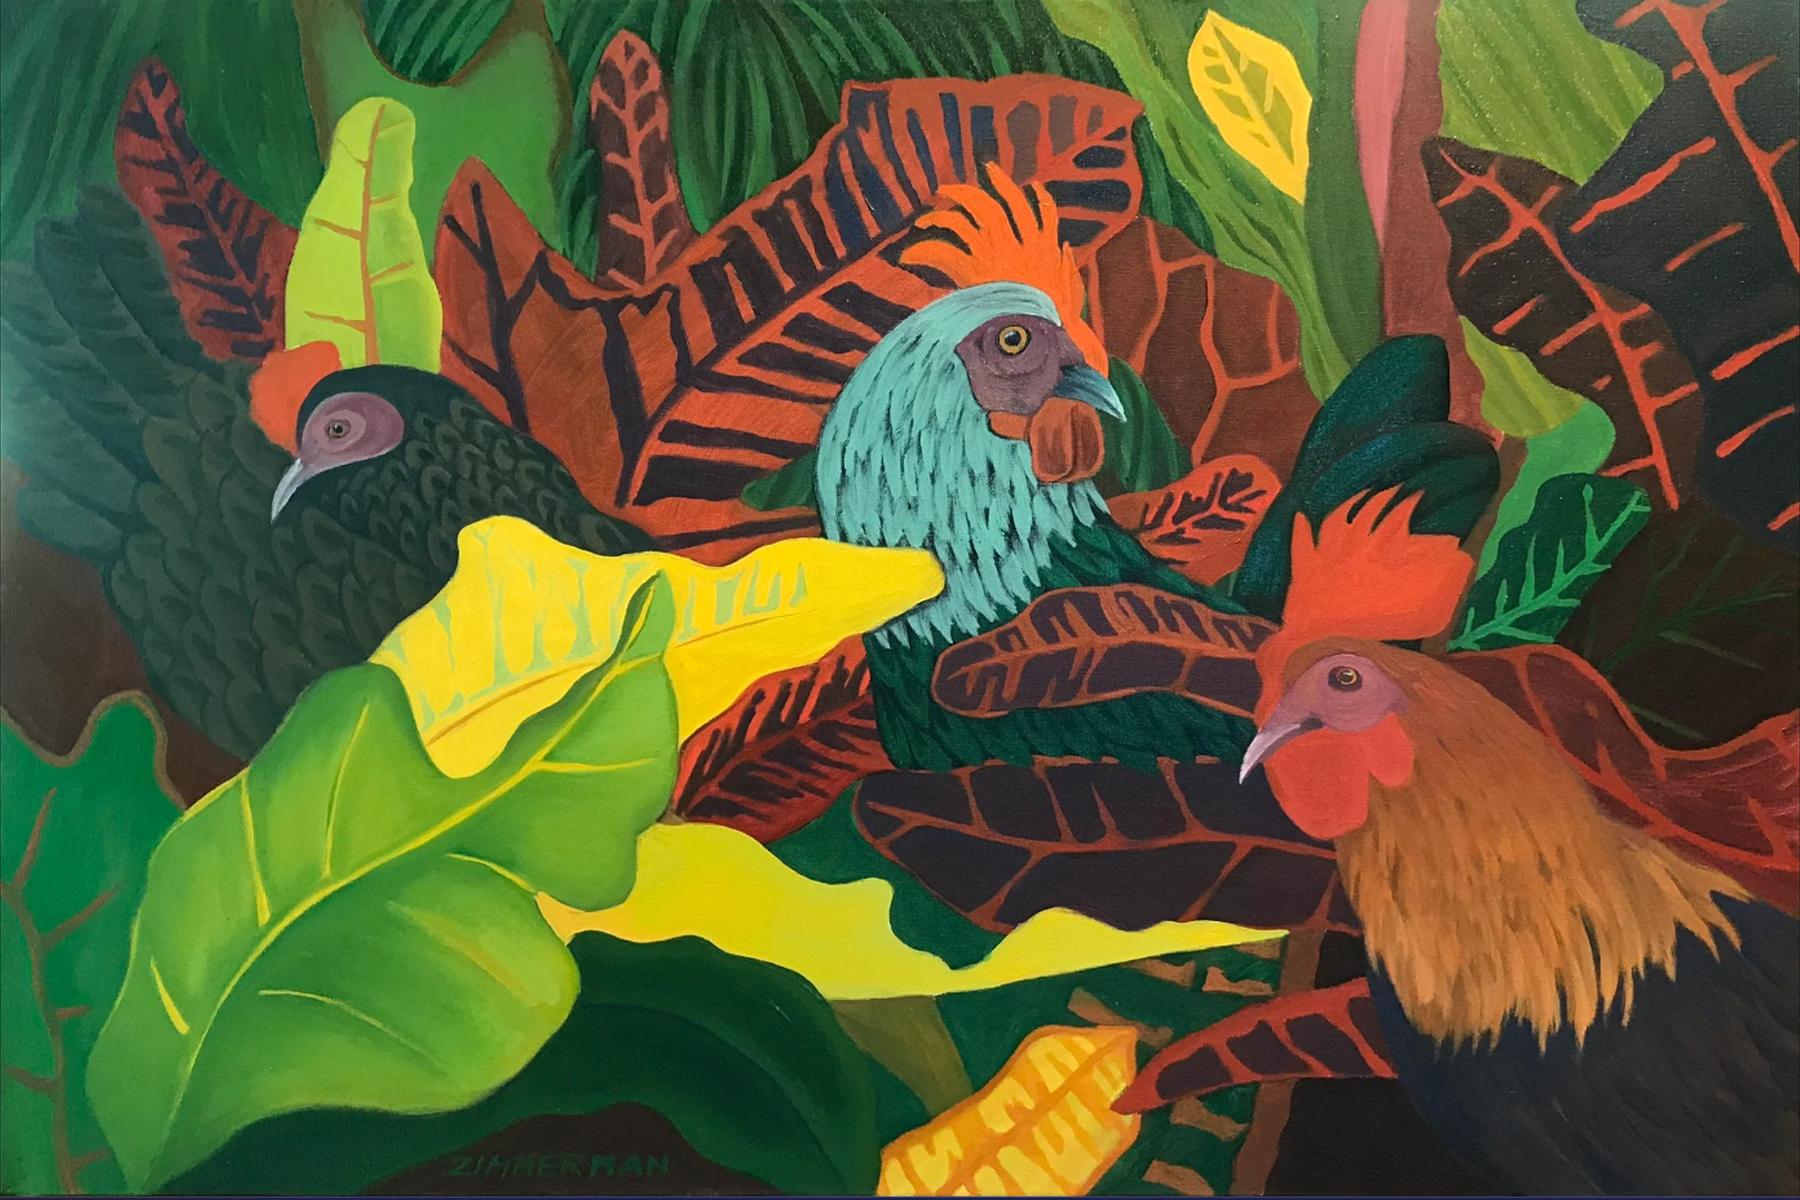 Lost and Found Chickens - by Marc Zimmerman


Marc Zimmerman creates playful paintings, whether deep mysterious jungle or delightfully whimsical florals. His color palette explores various harmonies yet always surprises with new color excitement.